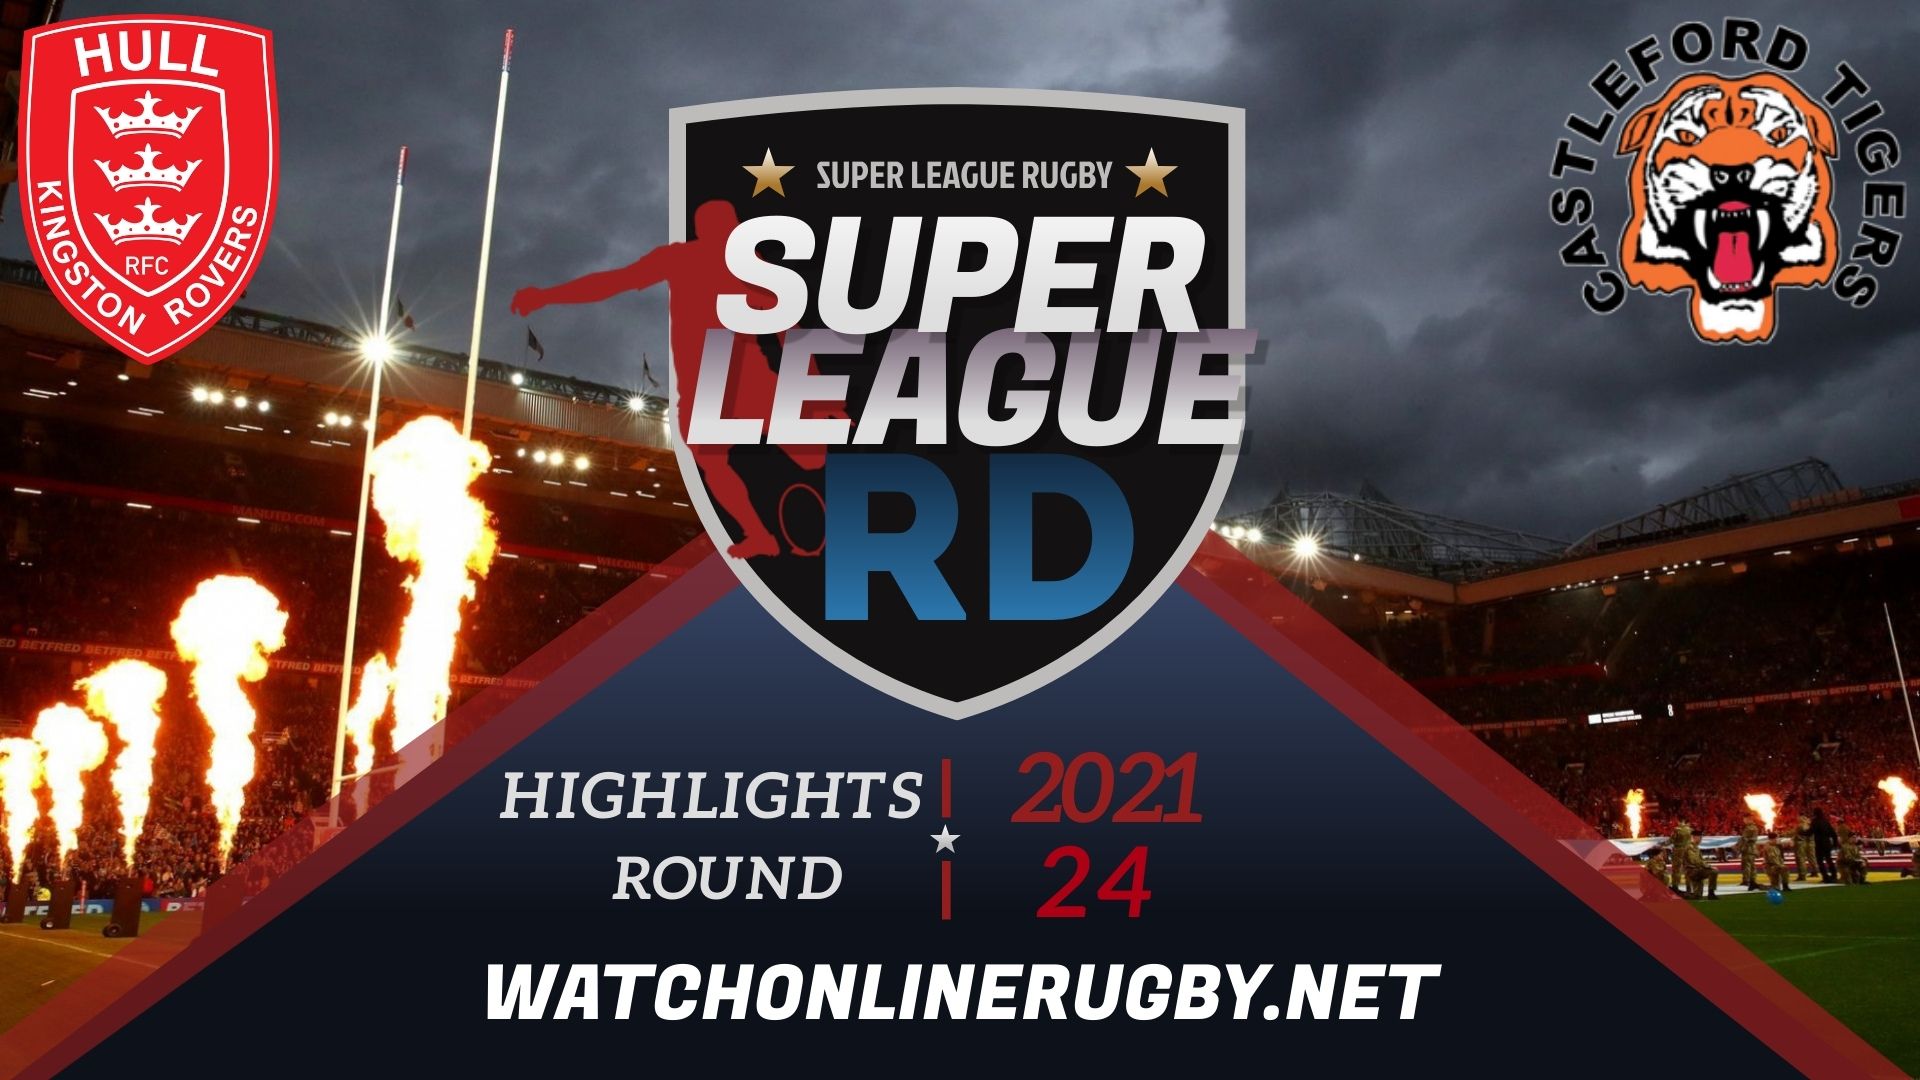 Hull KR Vs Castleford Tigers Super League Rugby 2021 RD 24